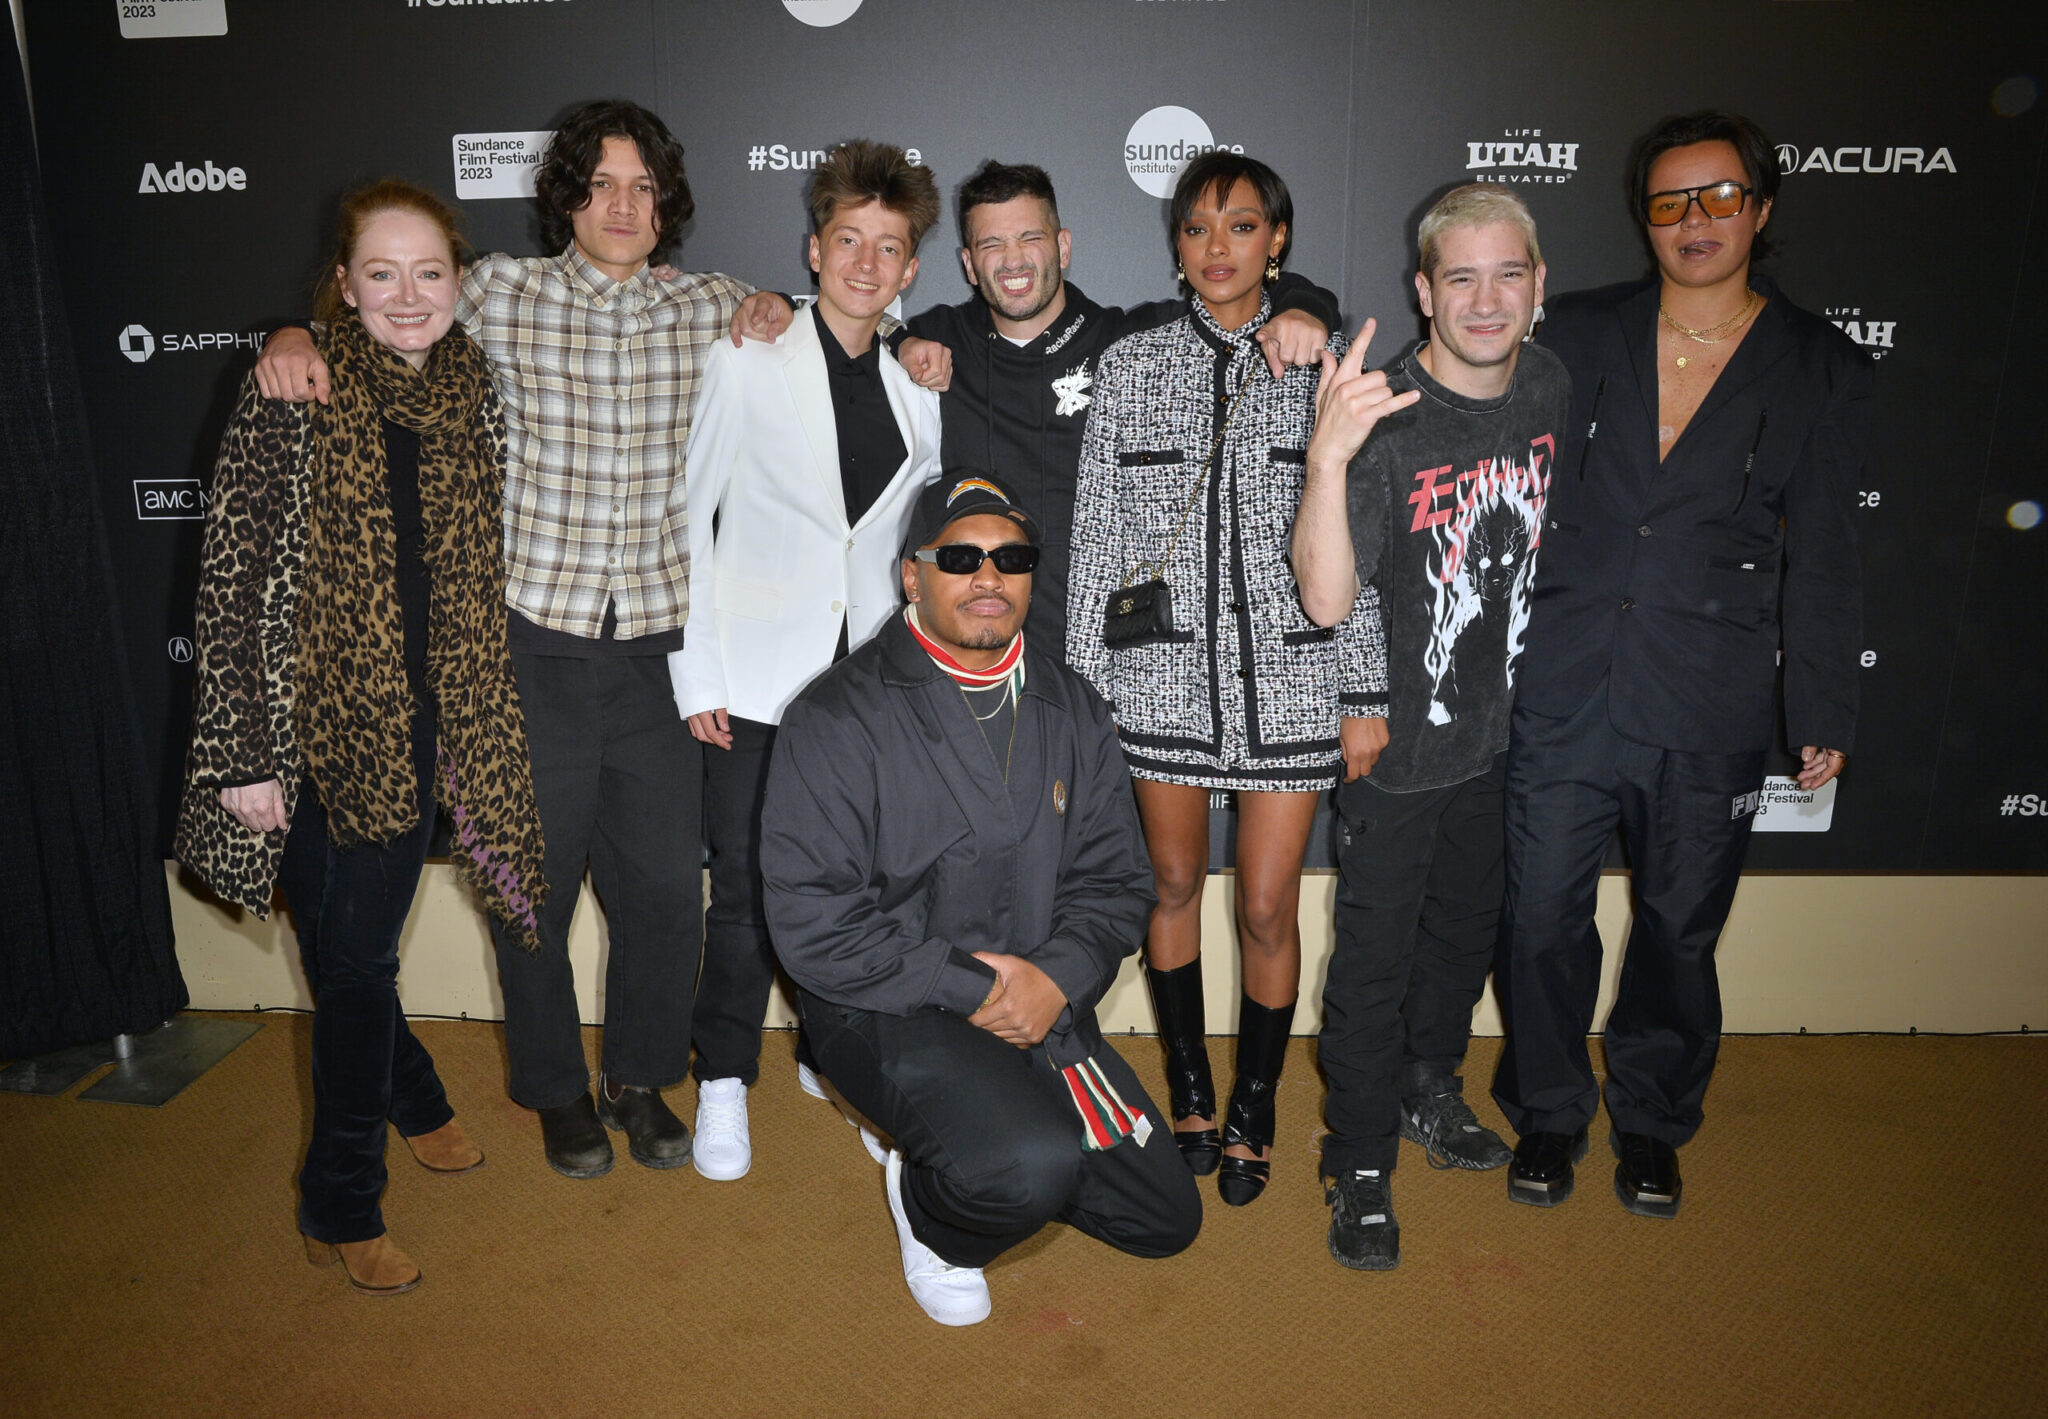 A woman with red hair and a leopard coat and scarf, a man with a plaid shirt and medium-length brown hair, a man in a white coat with spikey light brown hair, a man in a black hat and sunglasses dressed in all black kneeling in front, a man with blakc hair in all black, a woman with short black hair and a black and white tweed suit, a man with blonde hair and a black t-shirt, a man with black hair in an all-blakc suit, stand in front of a step and repeat at the 2023 Sundance Film Festival.